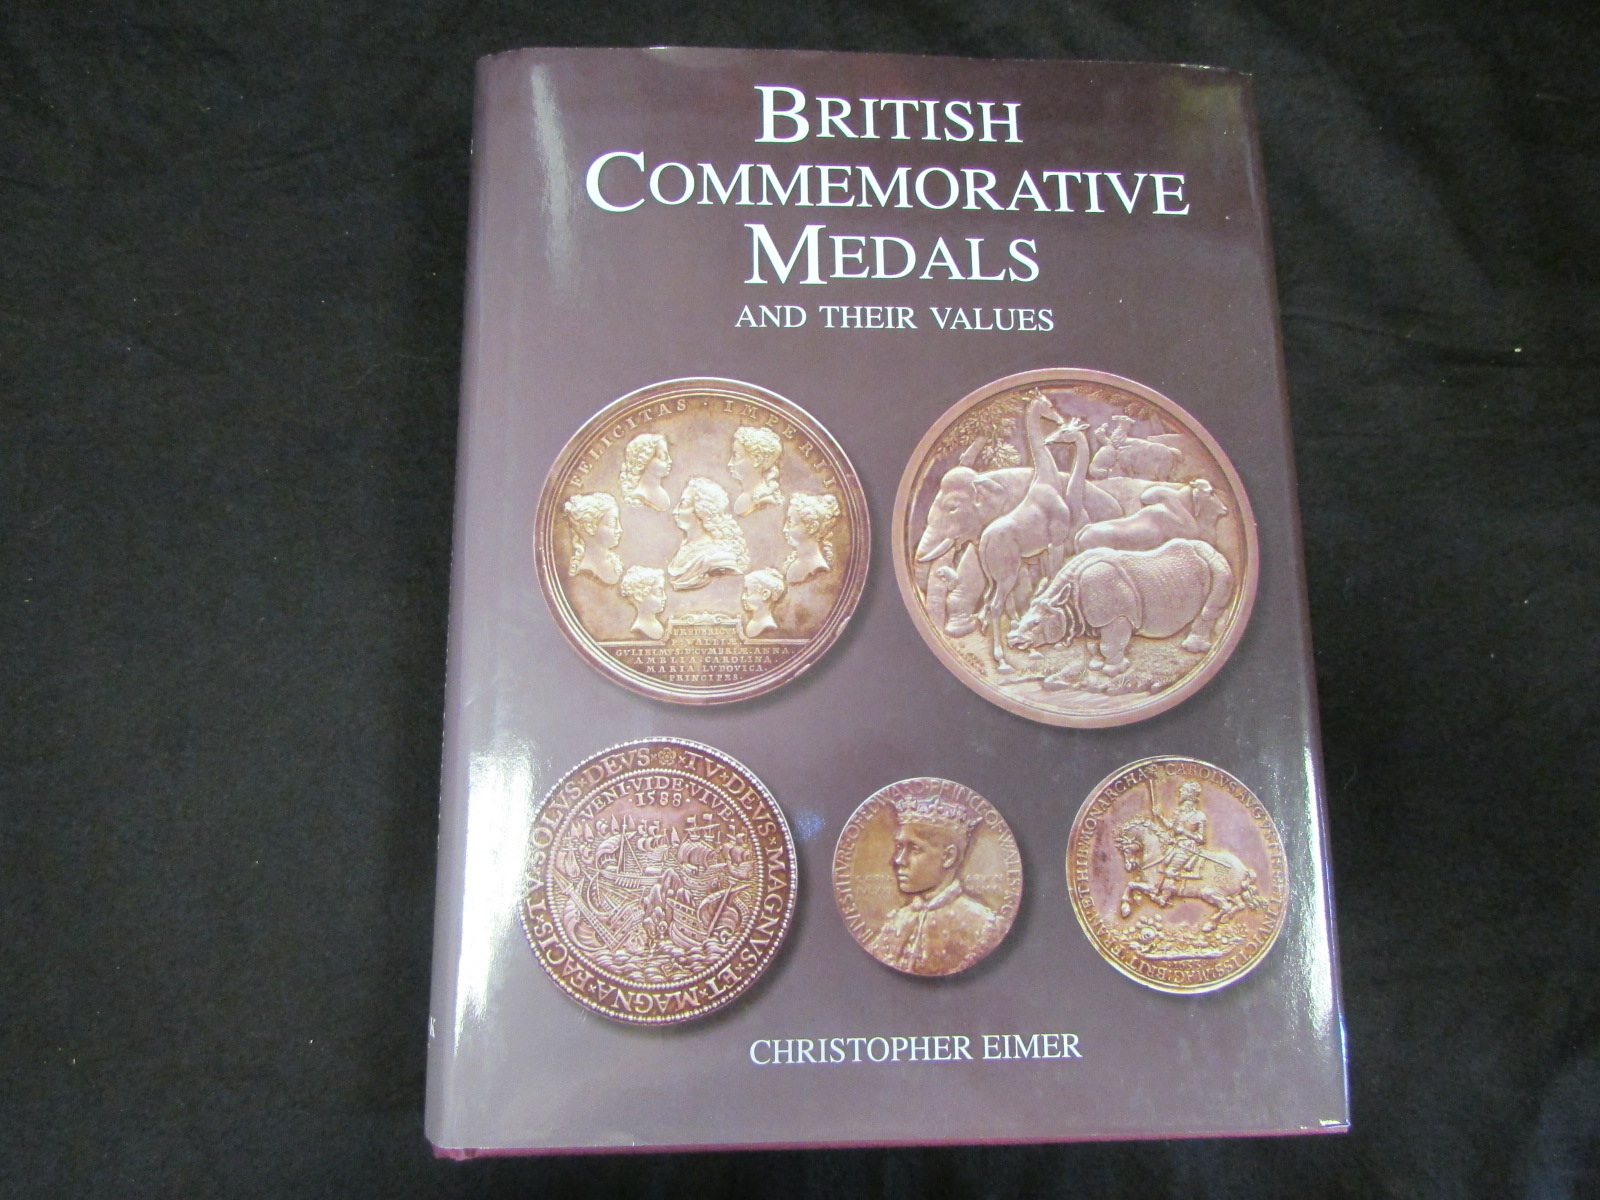 Book HB British Commemorative Medals and their values by Christopher Eimer, retail £75 as new